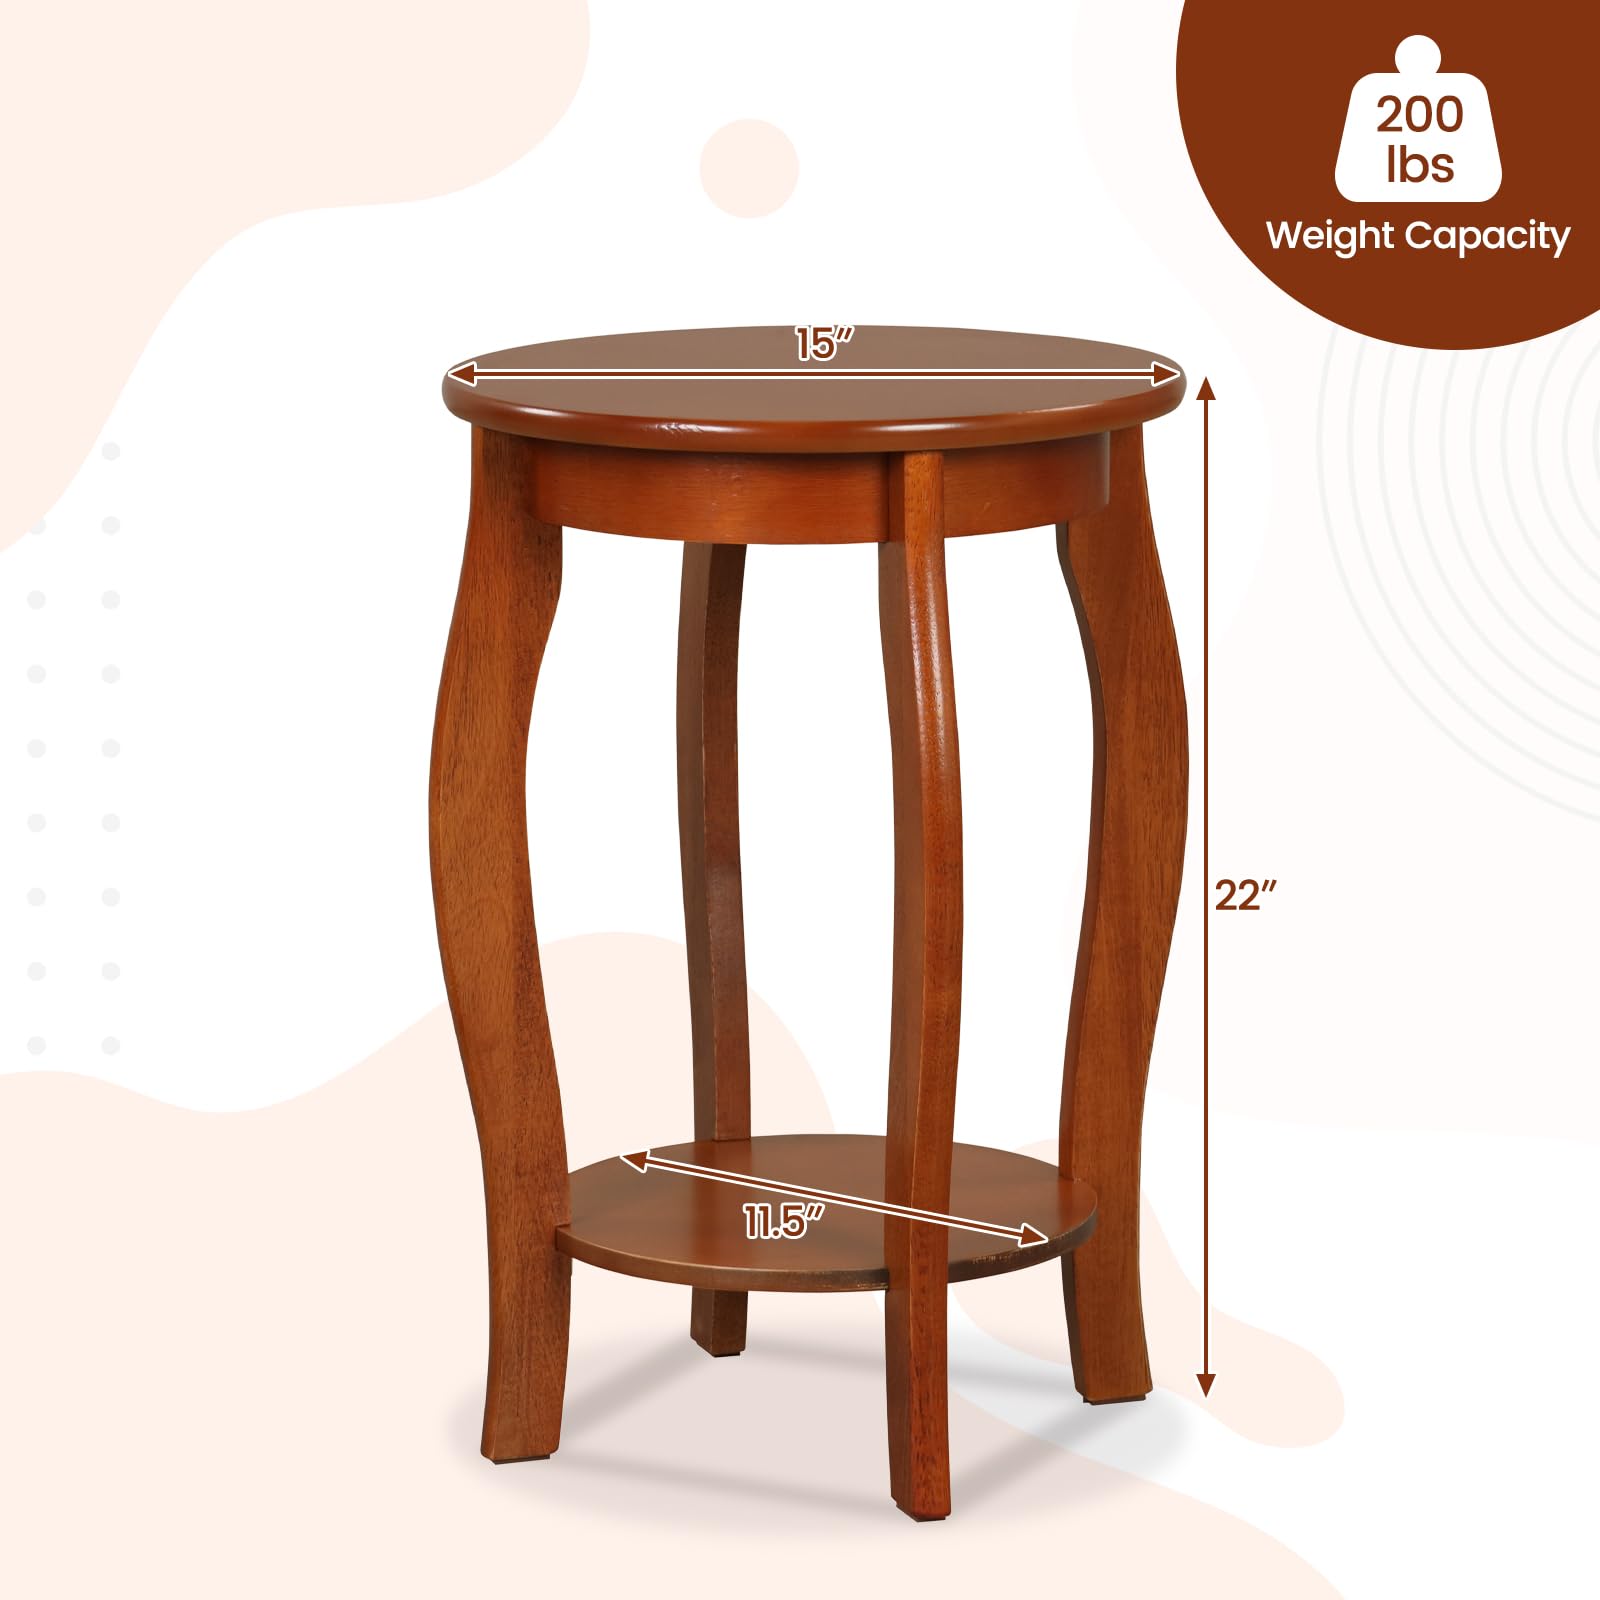 Giantex 2-Tier Round End Table, Narrow Tiered Telephone Table with Storage Shelf, Solid Wood Legs